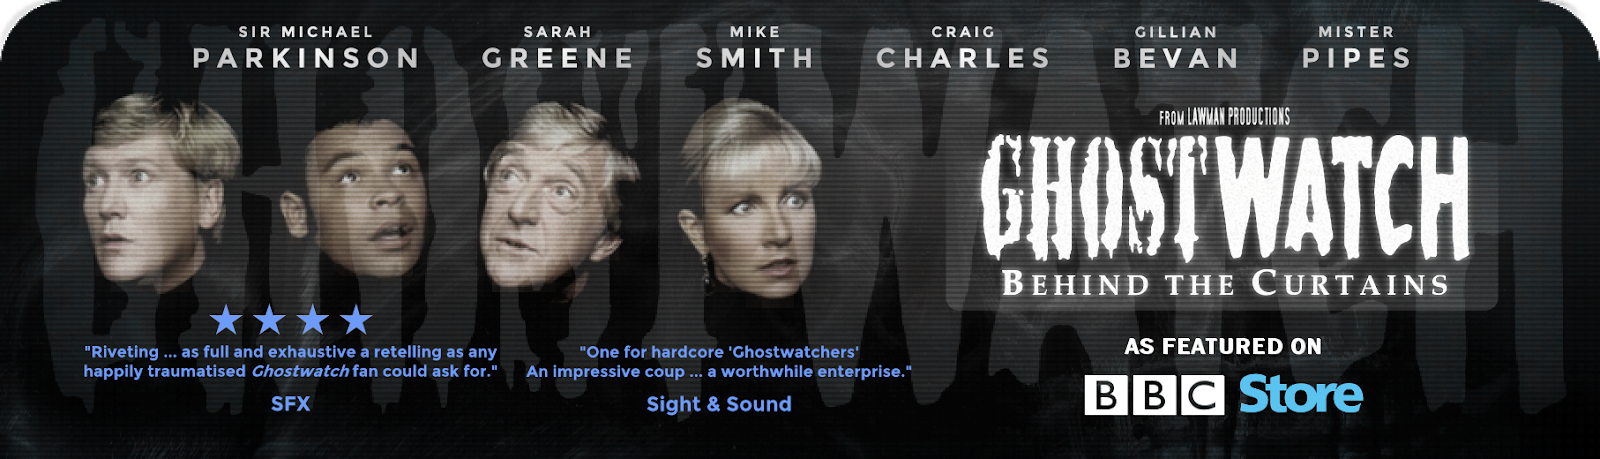 Ghostwatch: Behind the Curtains